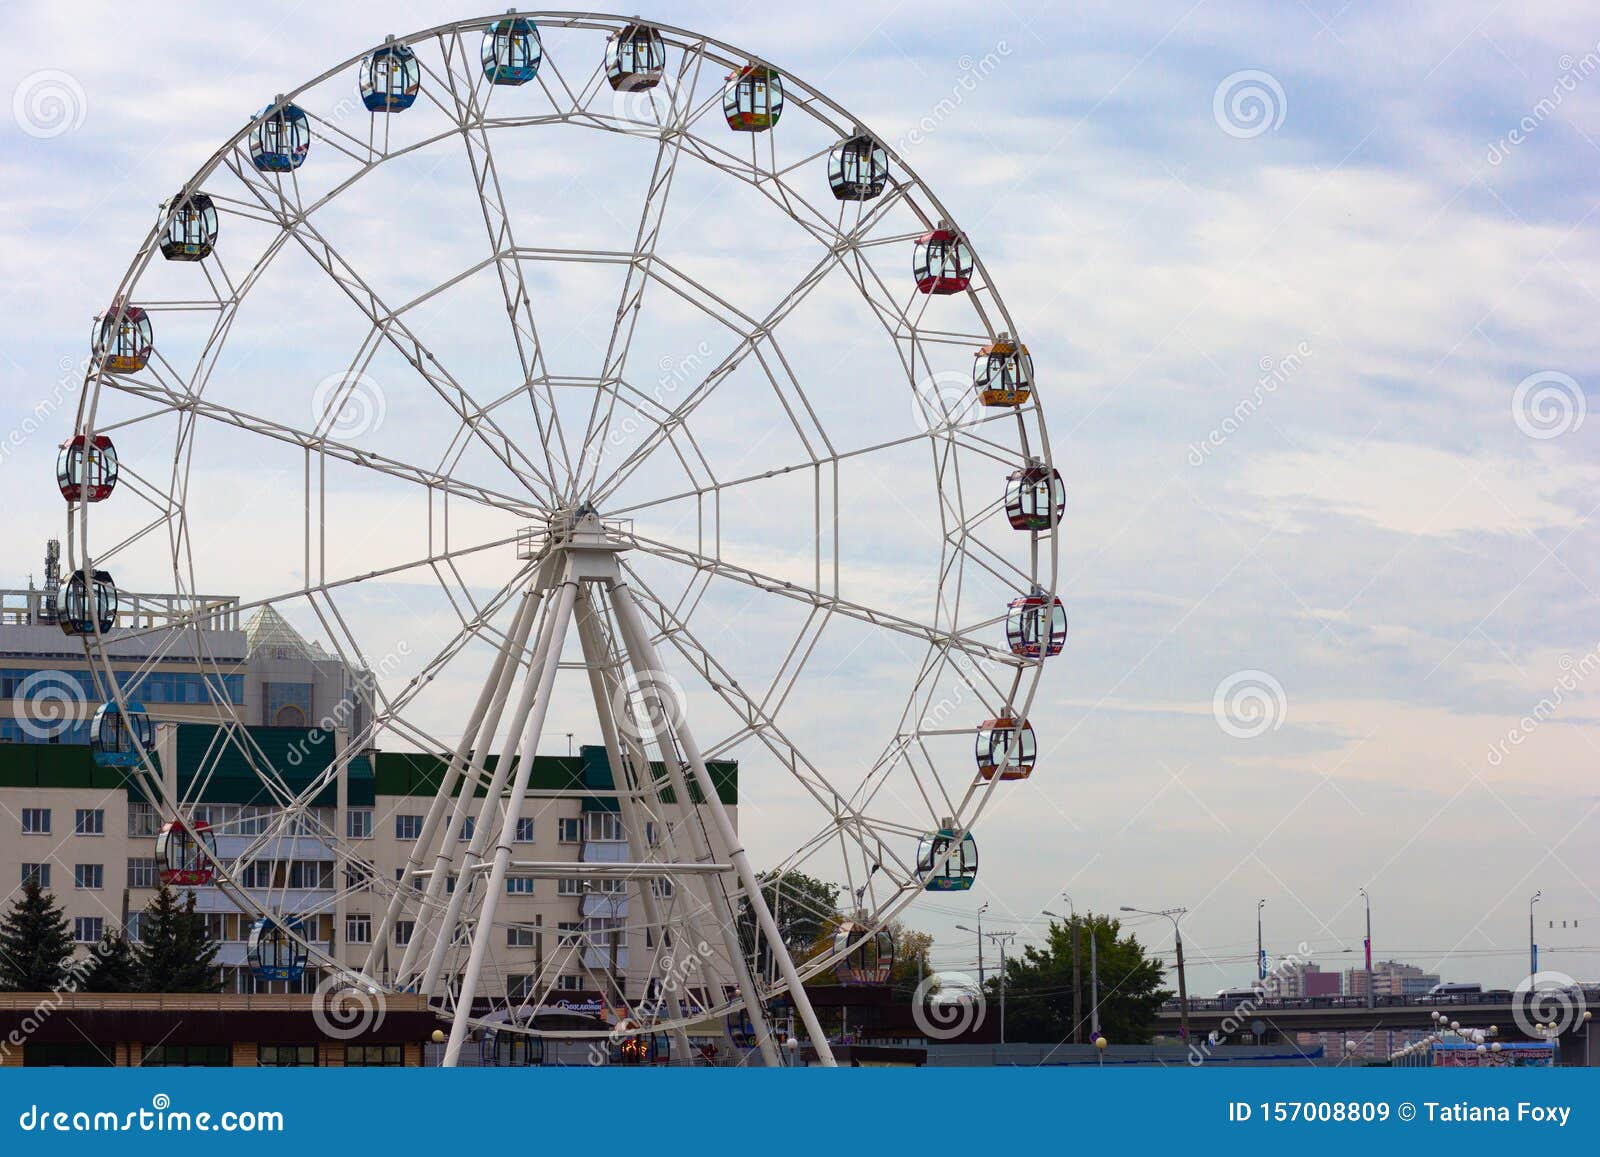 cantilevered observation wheel in ceboksary russia on the blue sky